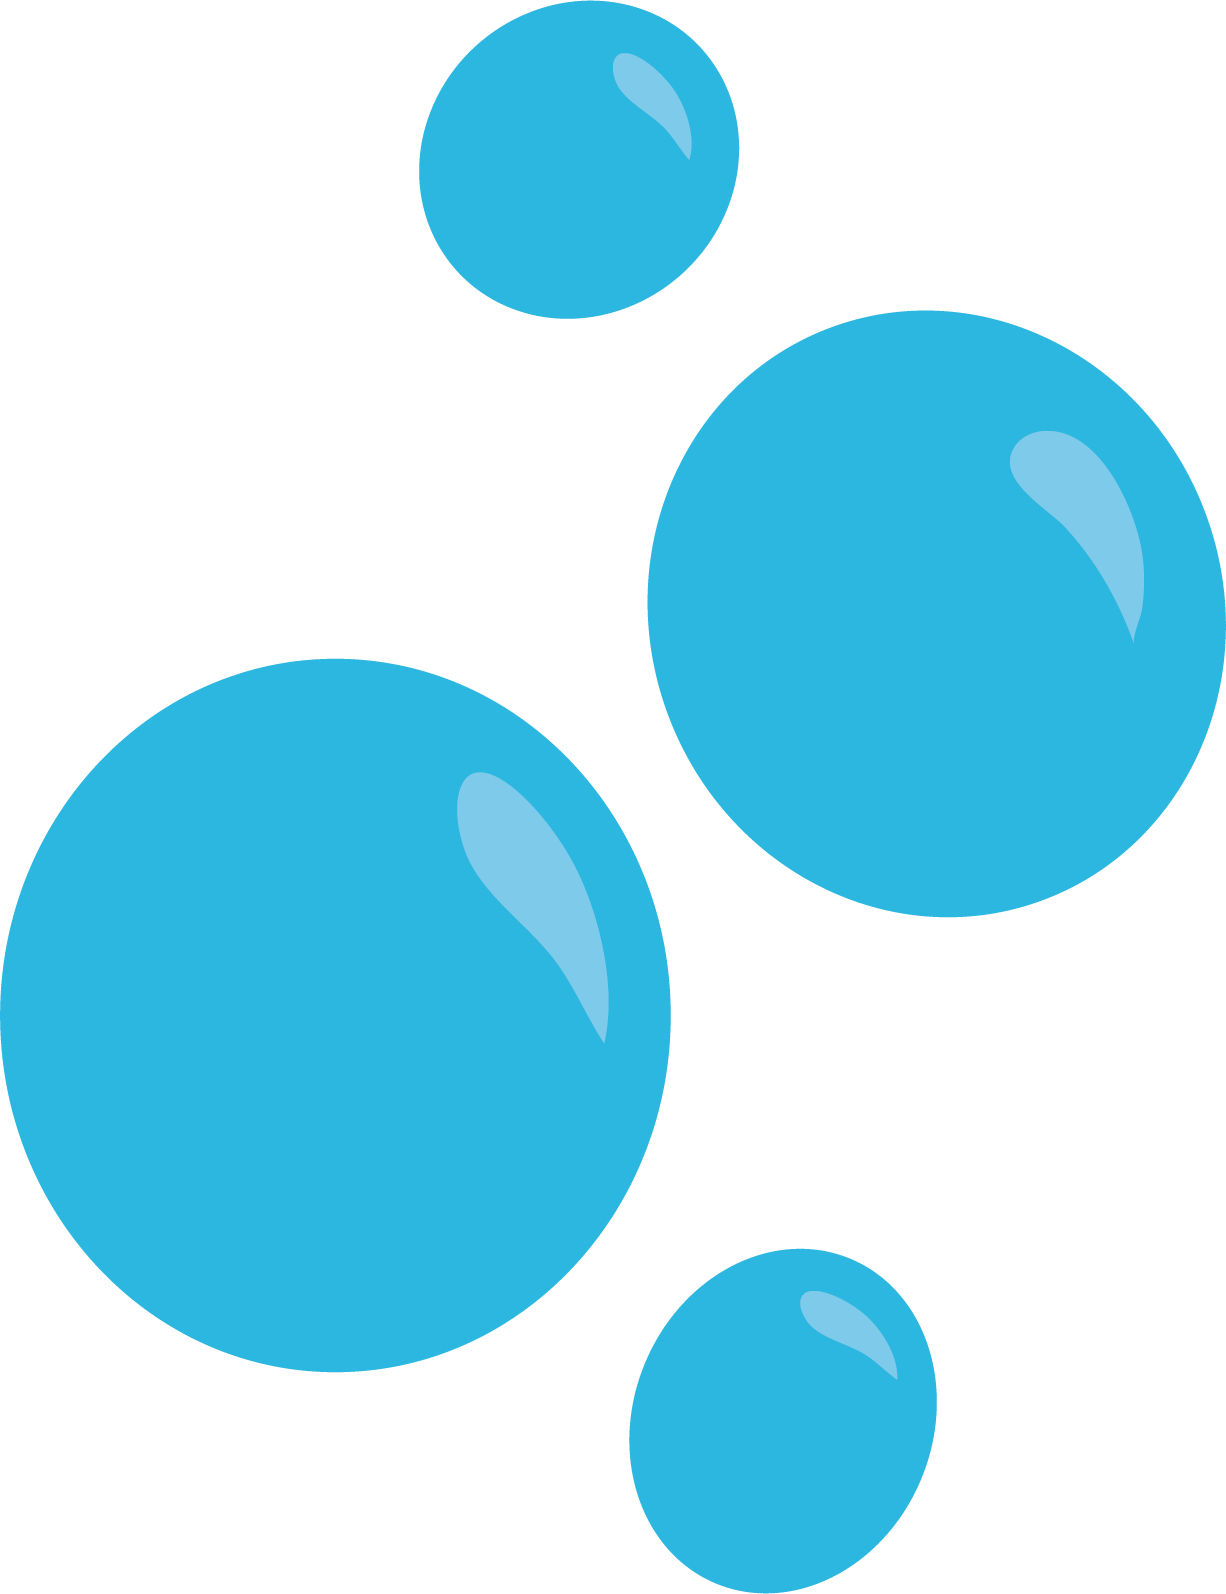 Four animated blue bubble icons.